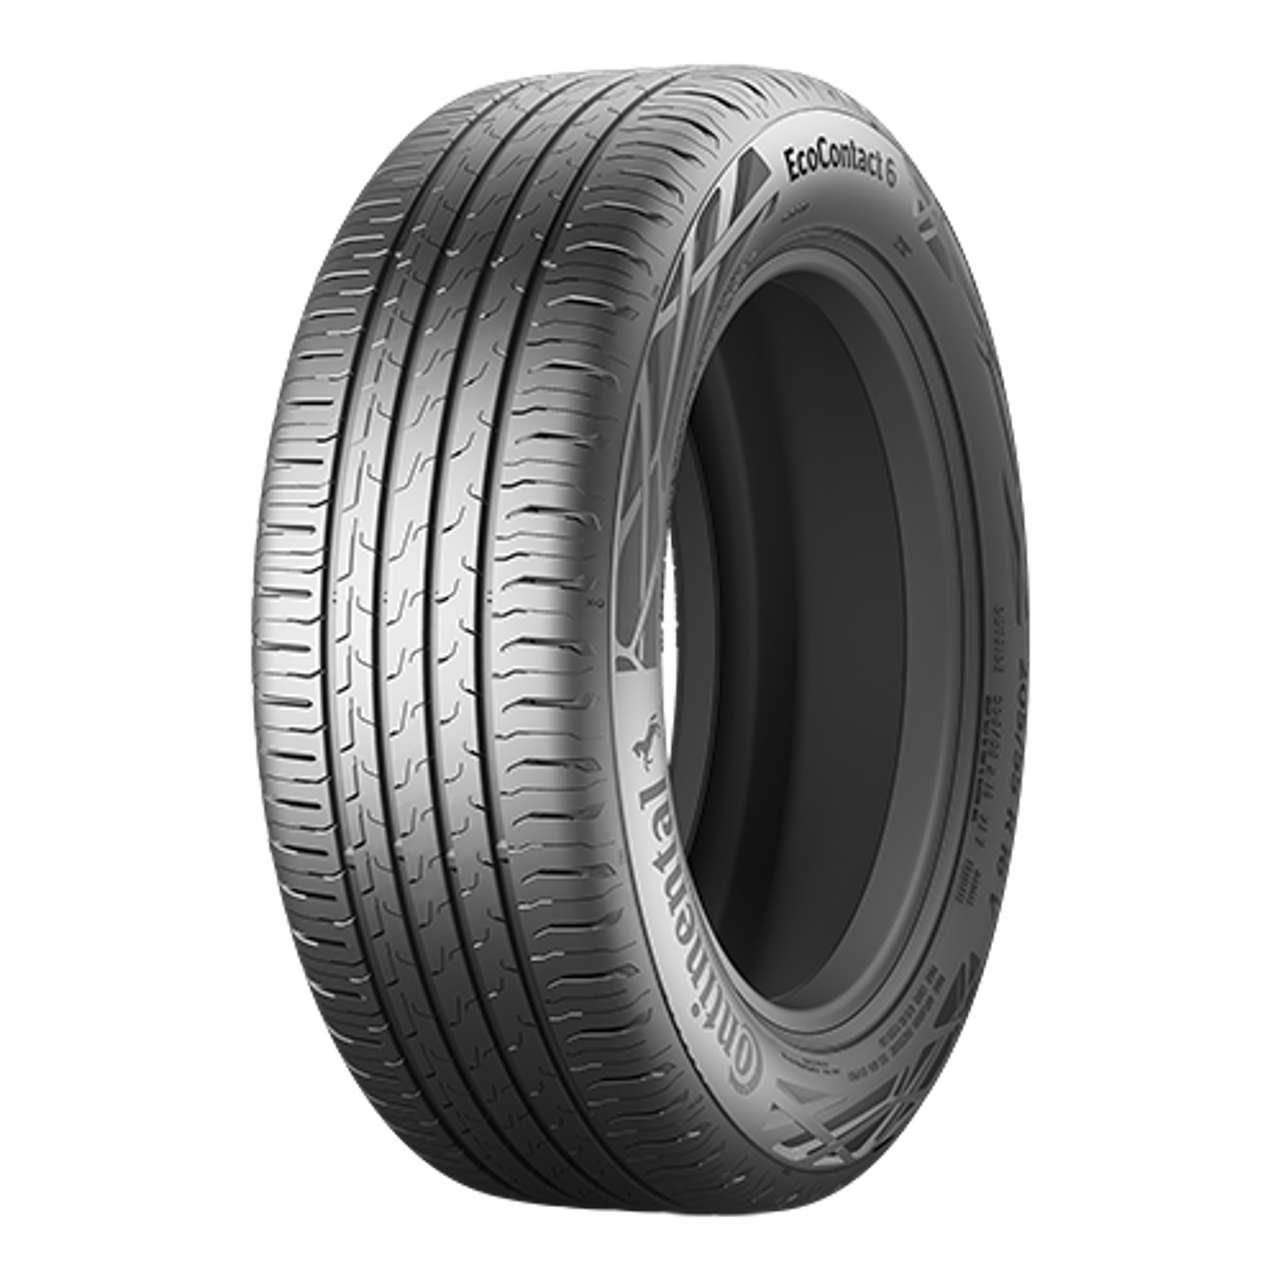 CONTINENTAL ECOCONTACT 6 (EVc) 155/80R13 79T von Continental